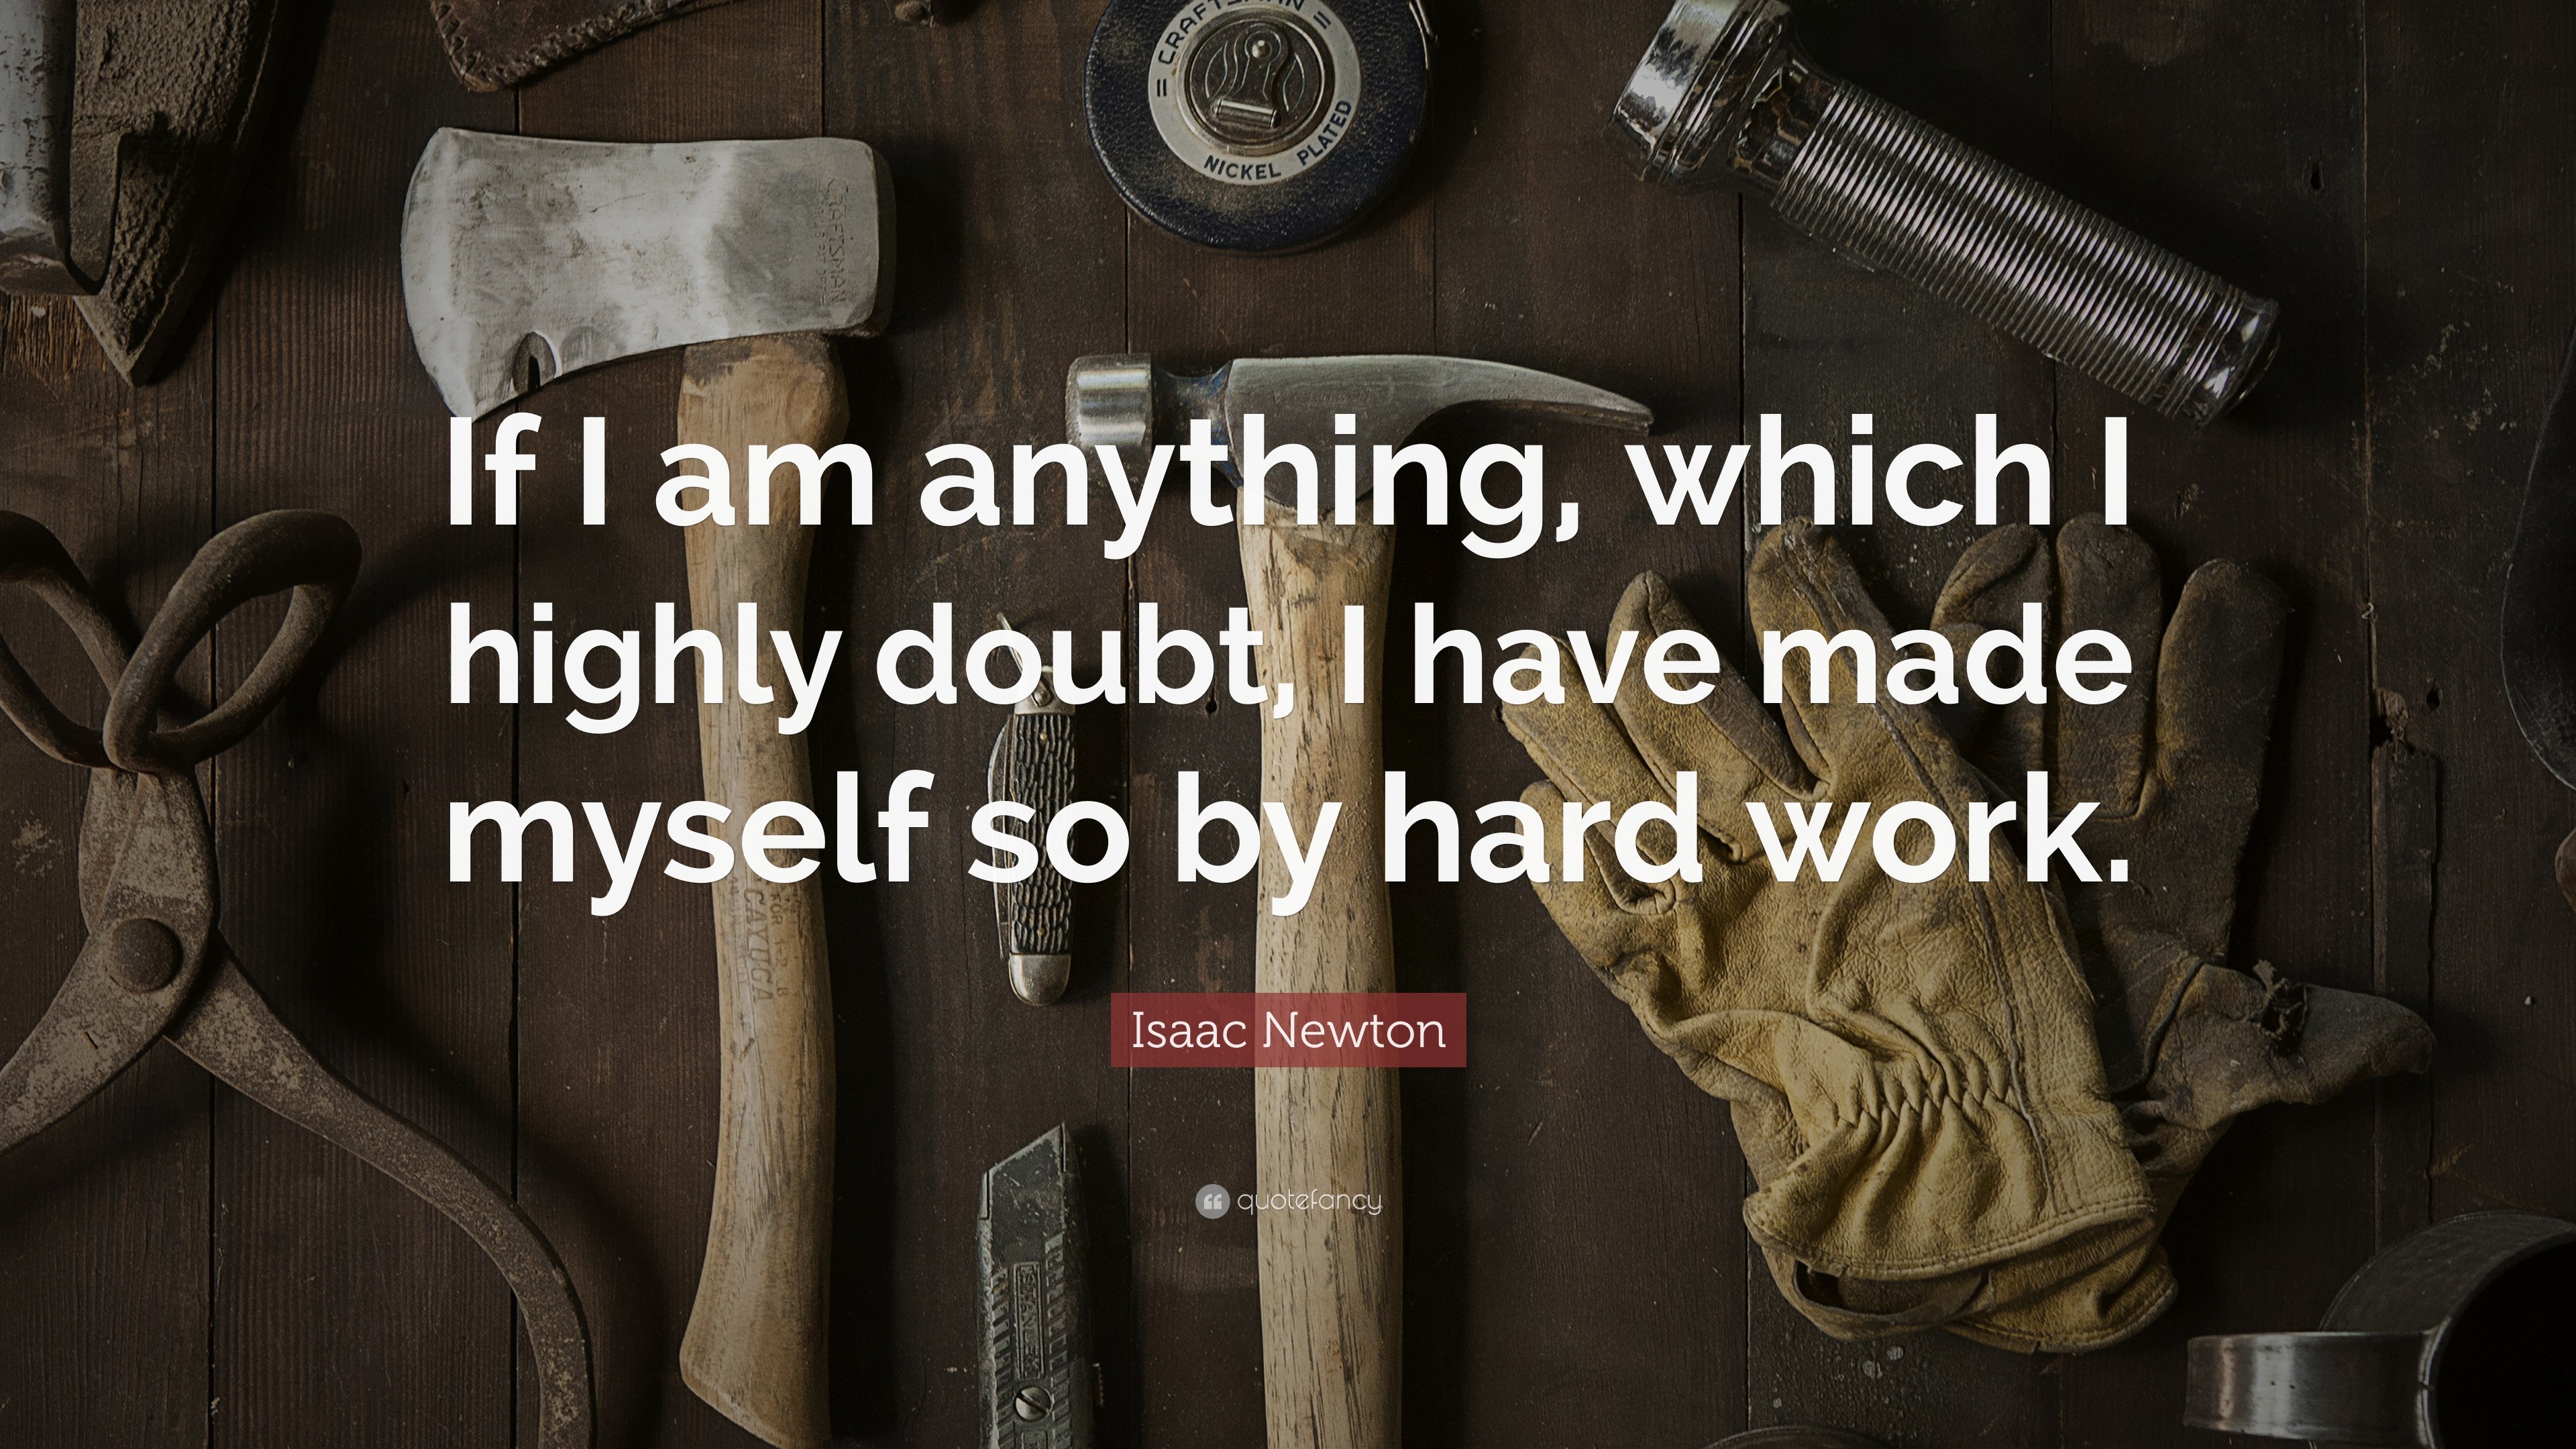 3840x2160 Isaac Newton Quote: “If I am anything, which I highly doubt, I